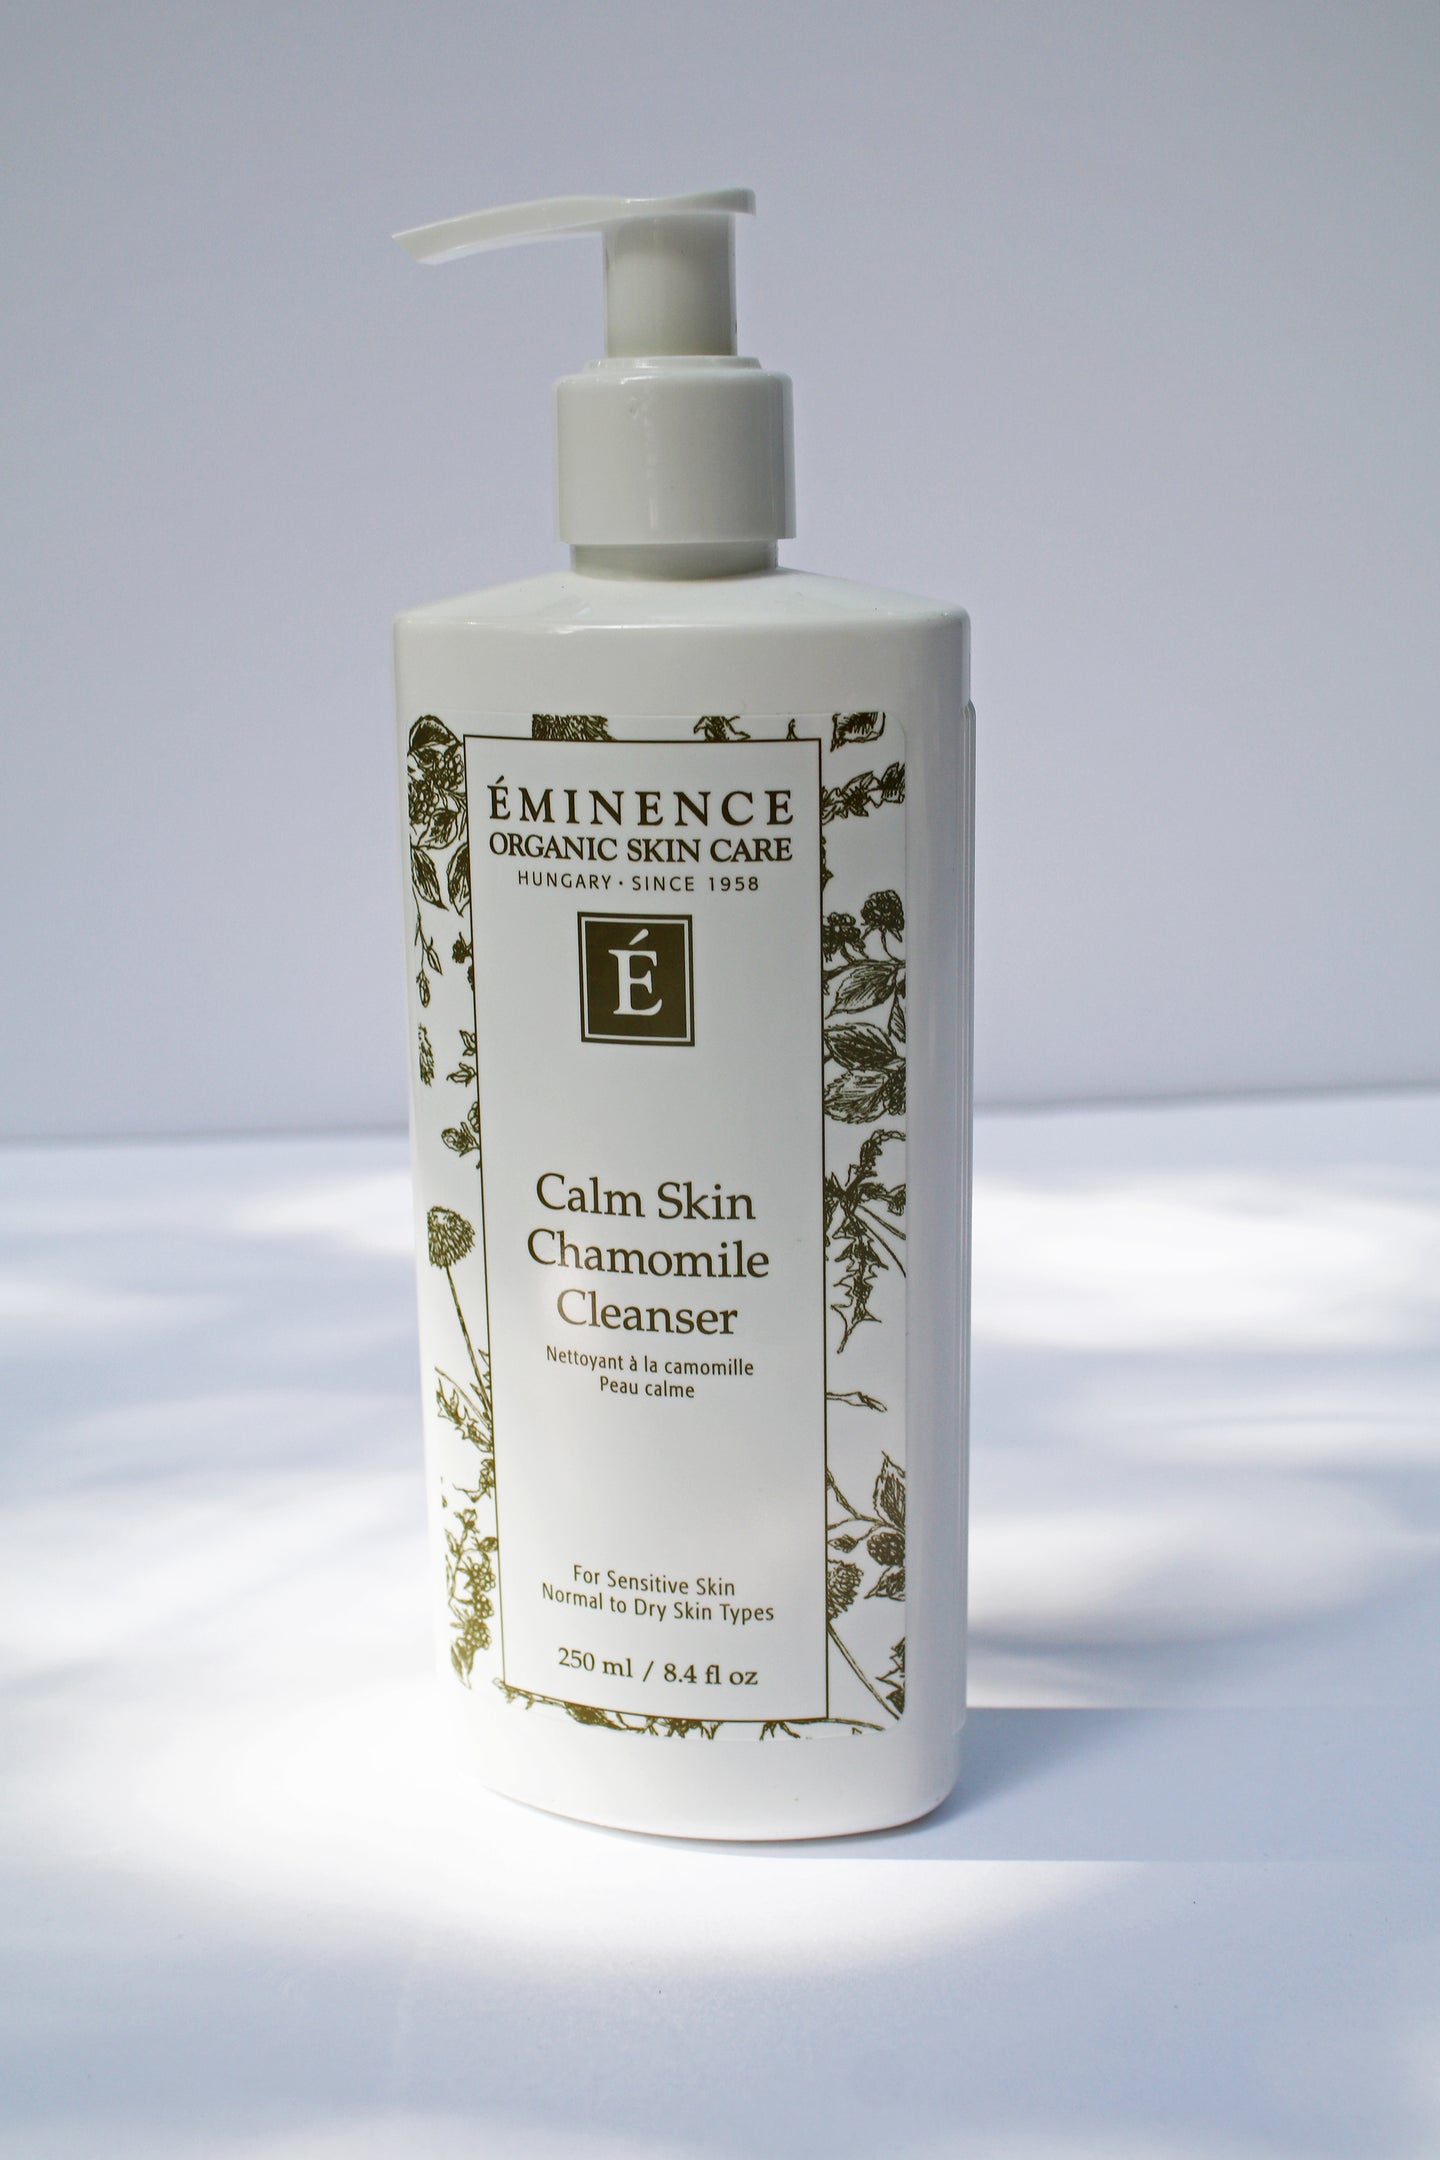 a bottle of the calm skin chamomile cleanser by Eminence